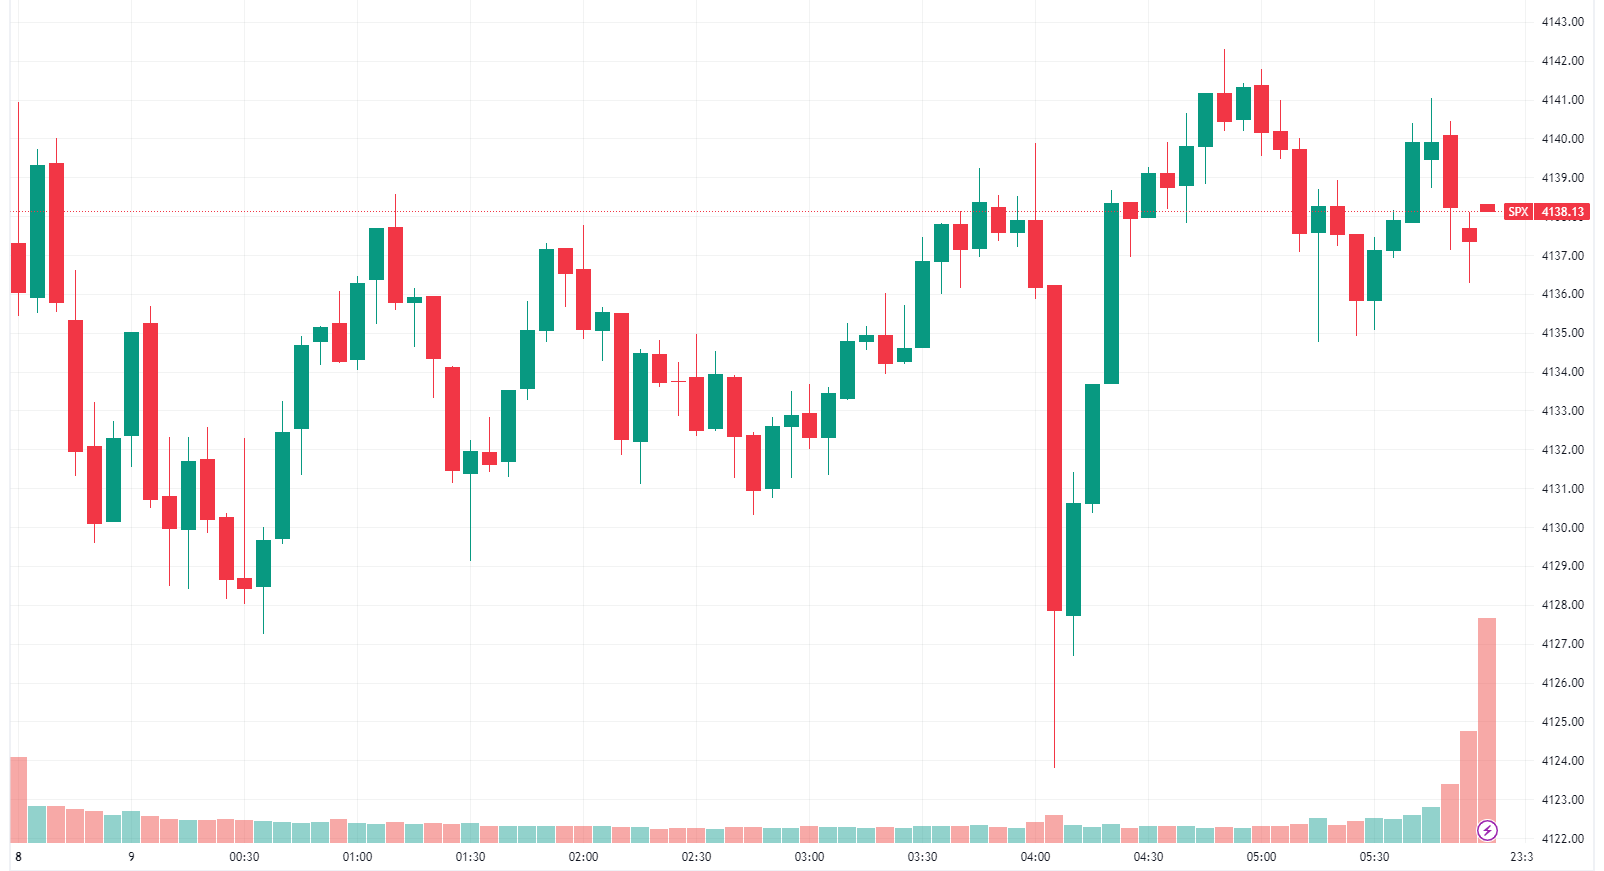 Choppy session with the S&P 500 falling sharply after SLOOS data was released at 4:00 am AEST (Source: TradingView)